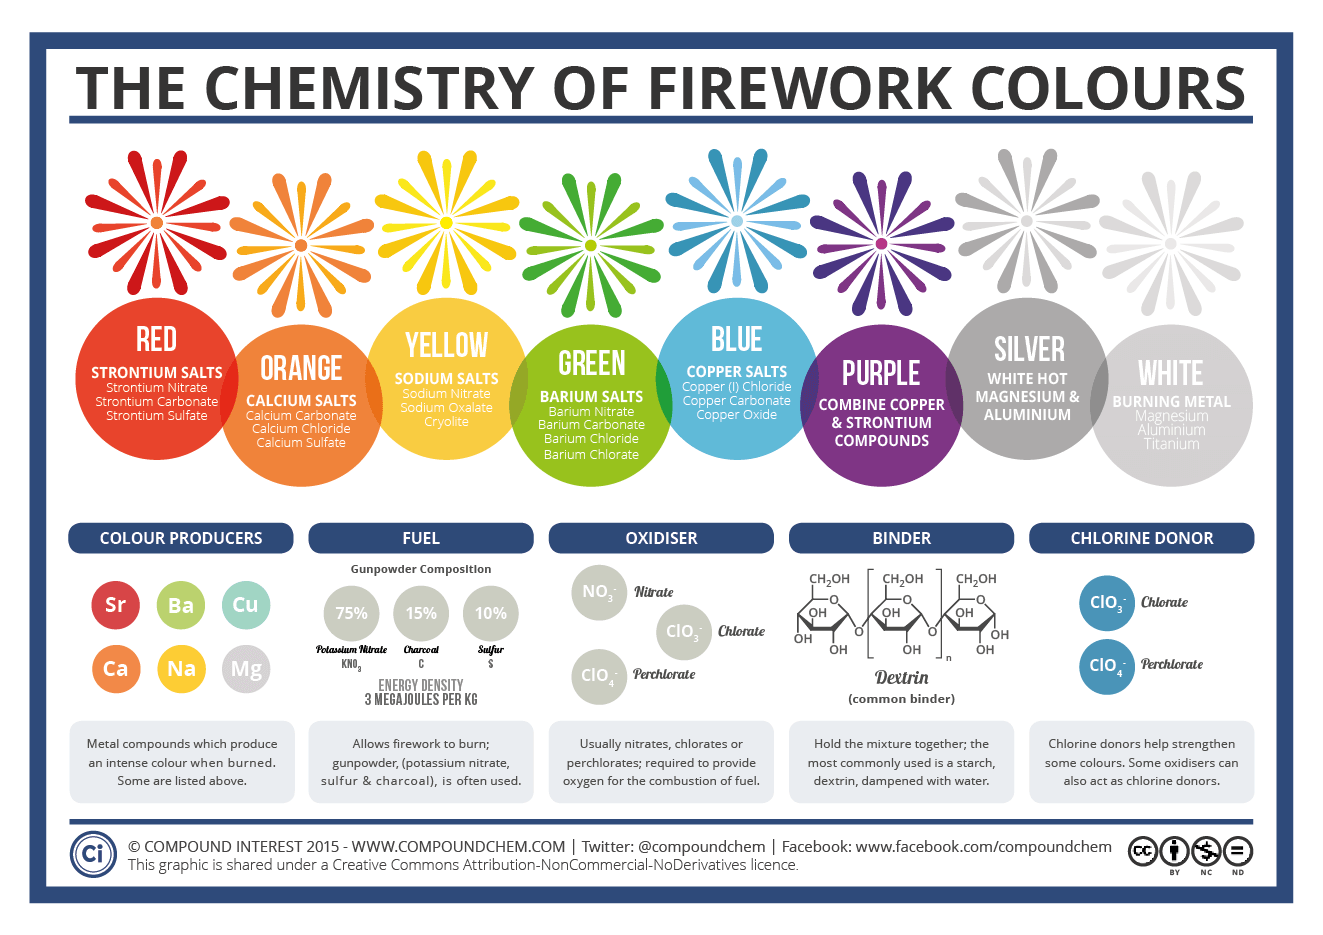 an infographic showing what elements are used to make different firework colors